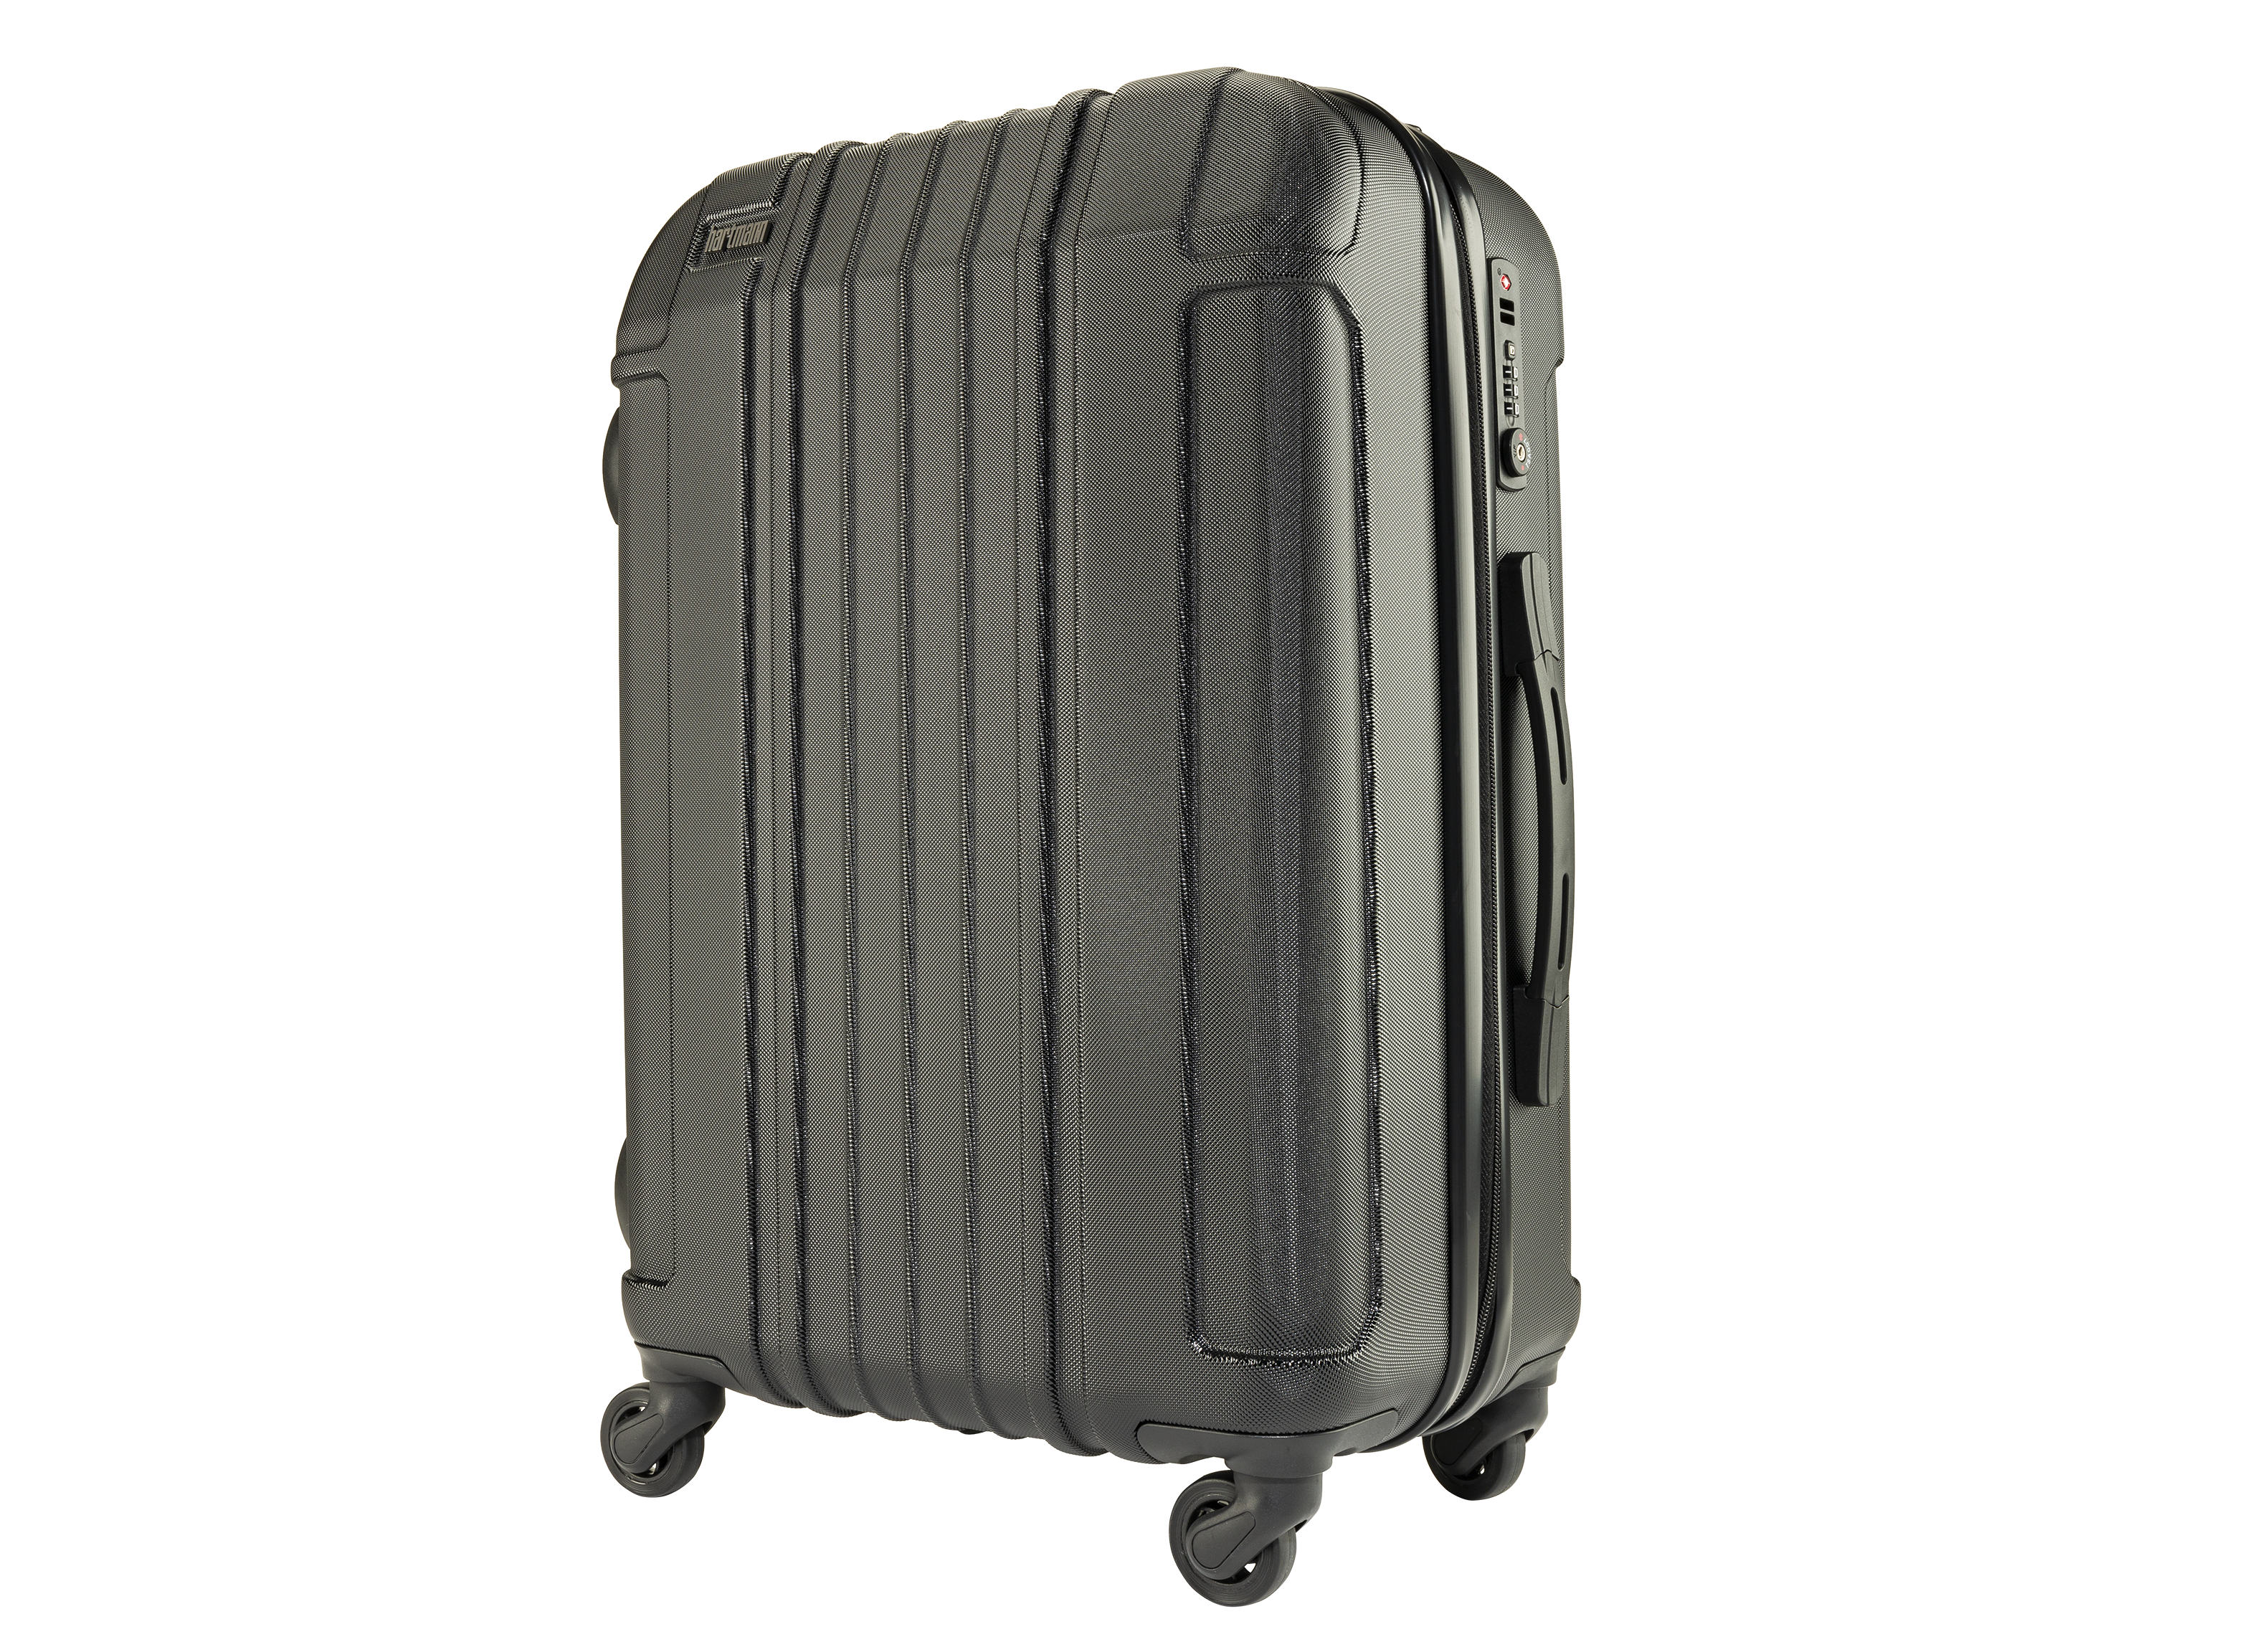 Hartmann 21 Vigor Carry-On Spinner Luggage Review - Consumer Reports